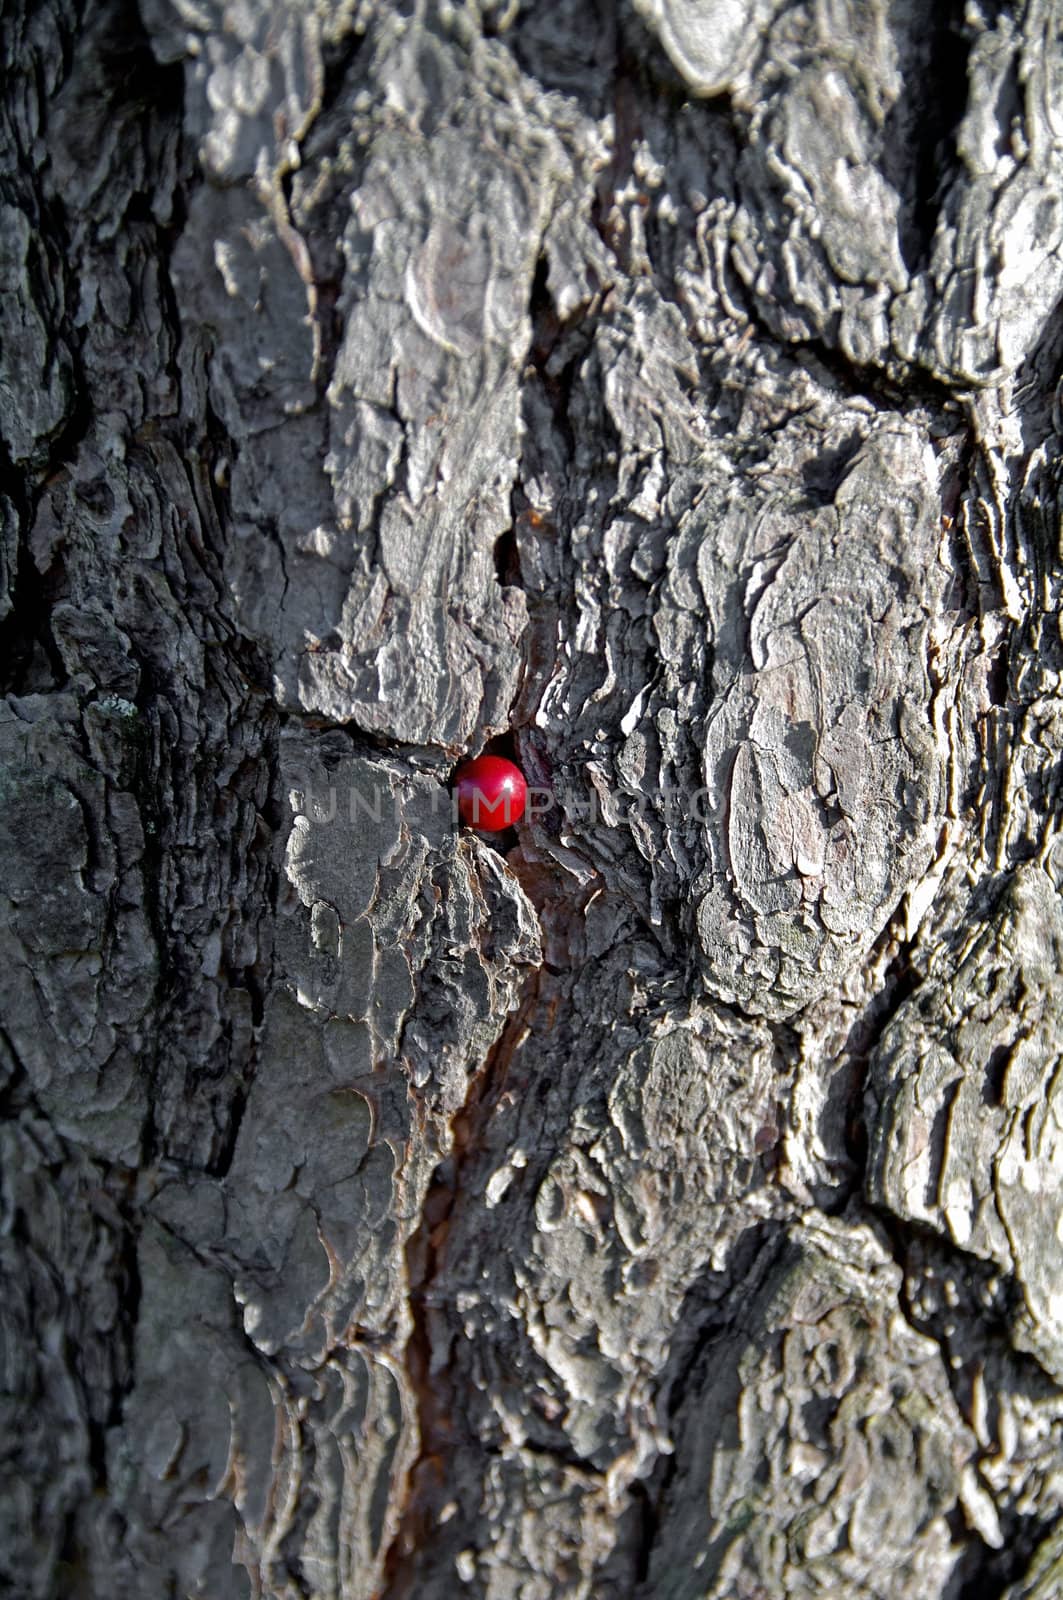 A cranberry block in the bark